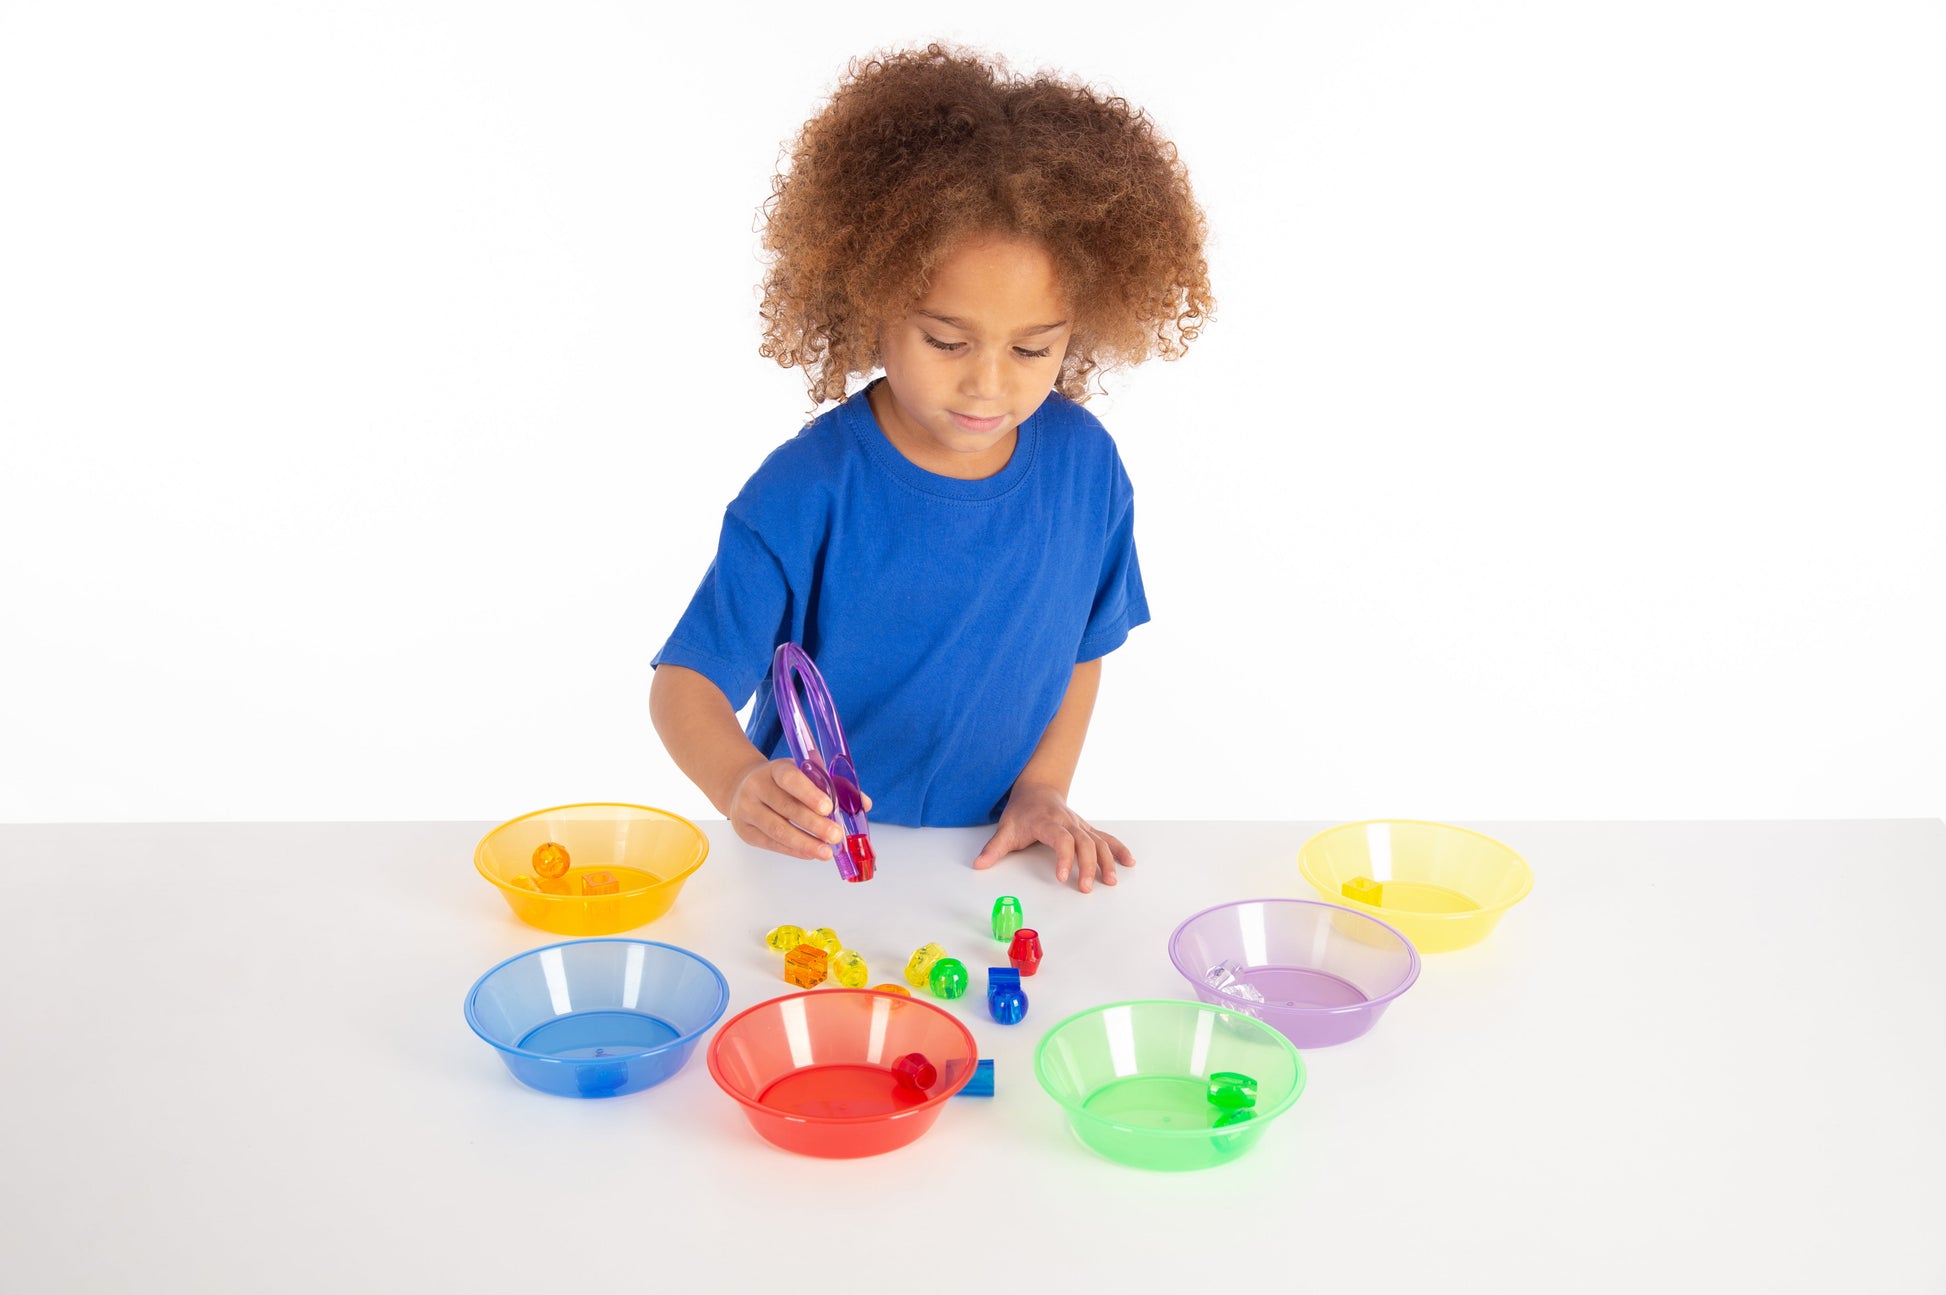 Translucent Colour Tweezers - Pk12 | Learning and Exploring Through Play